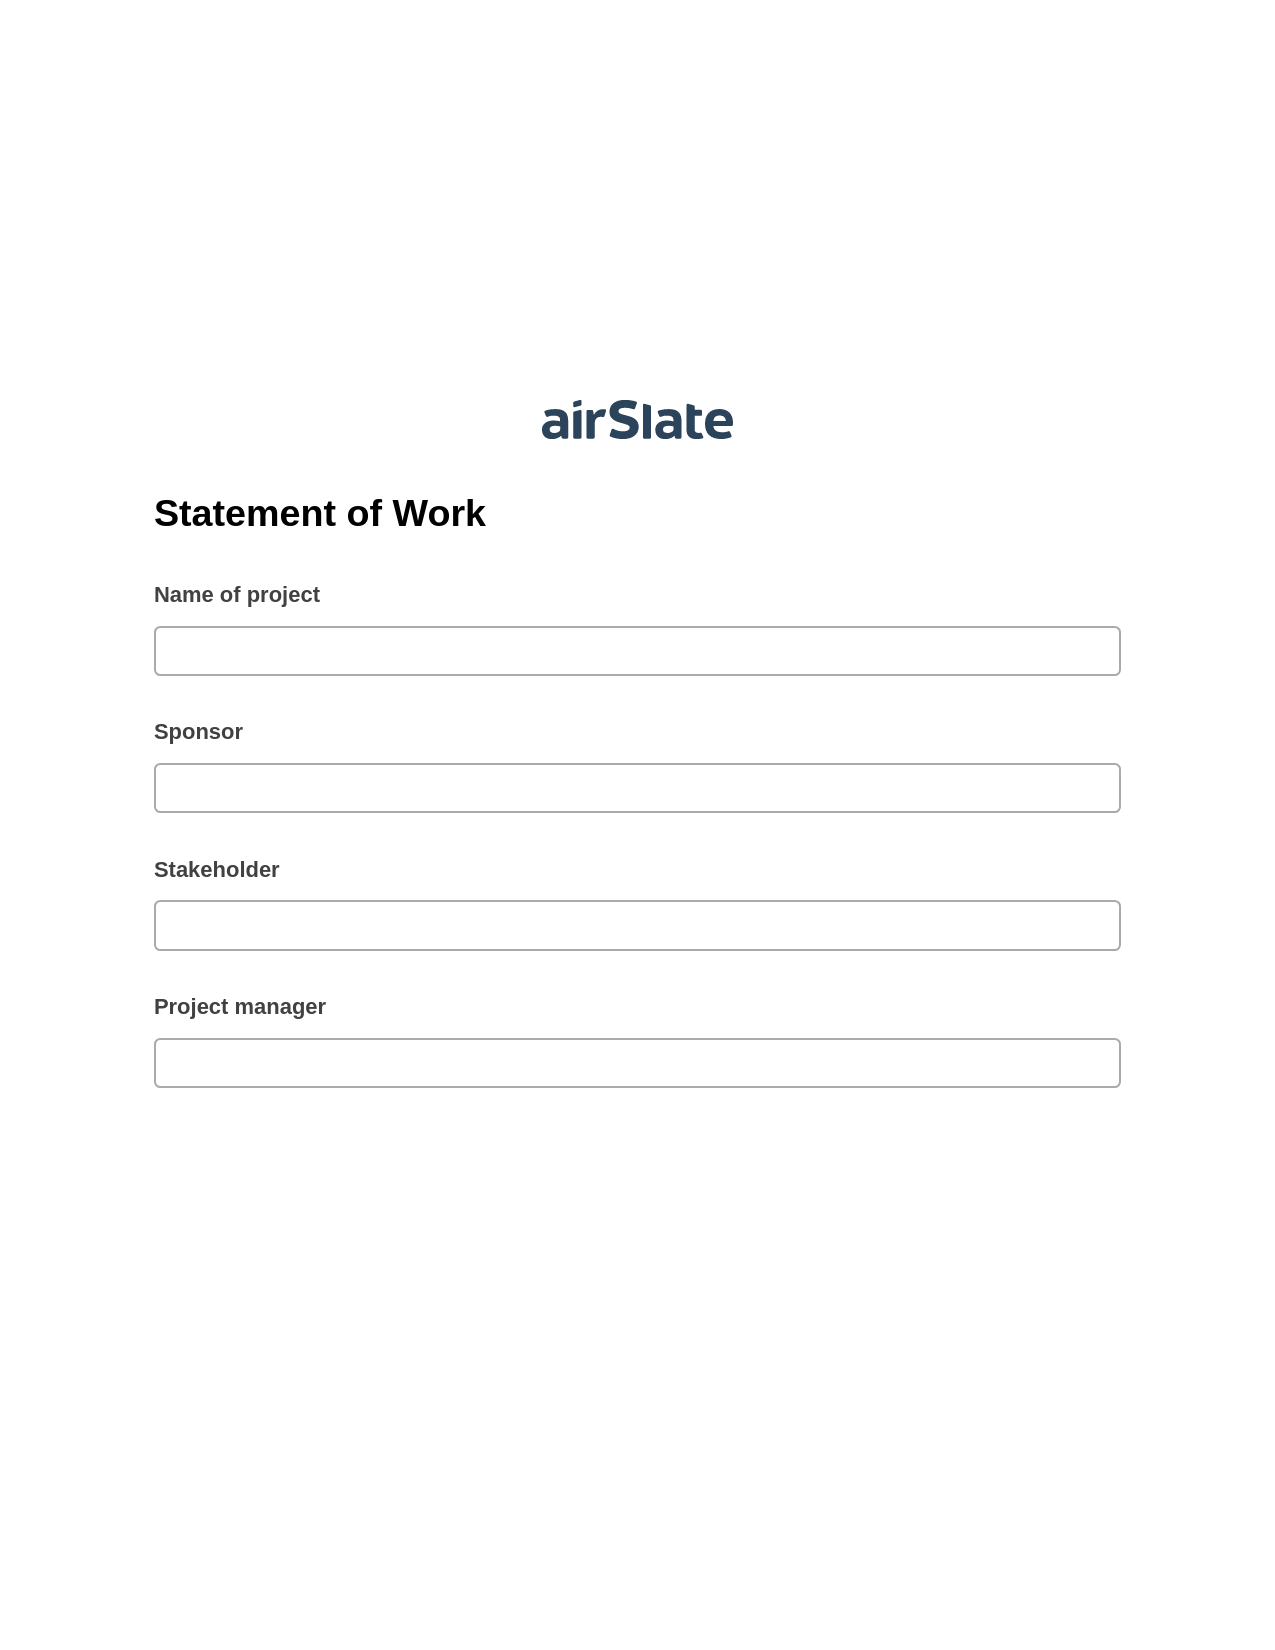 Statement of Work Pre-fill from Google Sheet Dropdown Options Bot, Send a Slate with Roles Bot, Export to Formstack Documents Bot